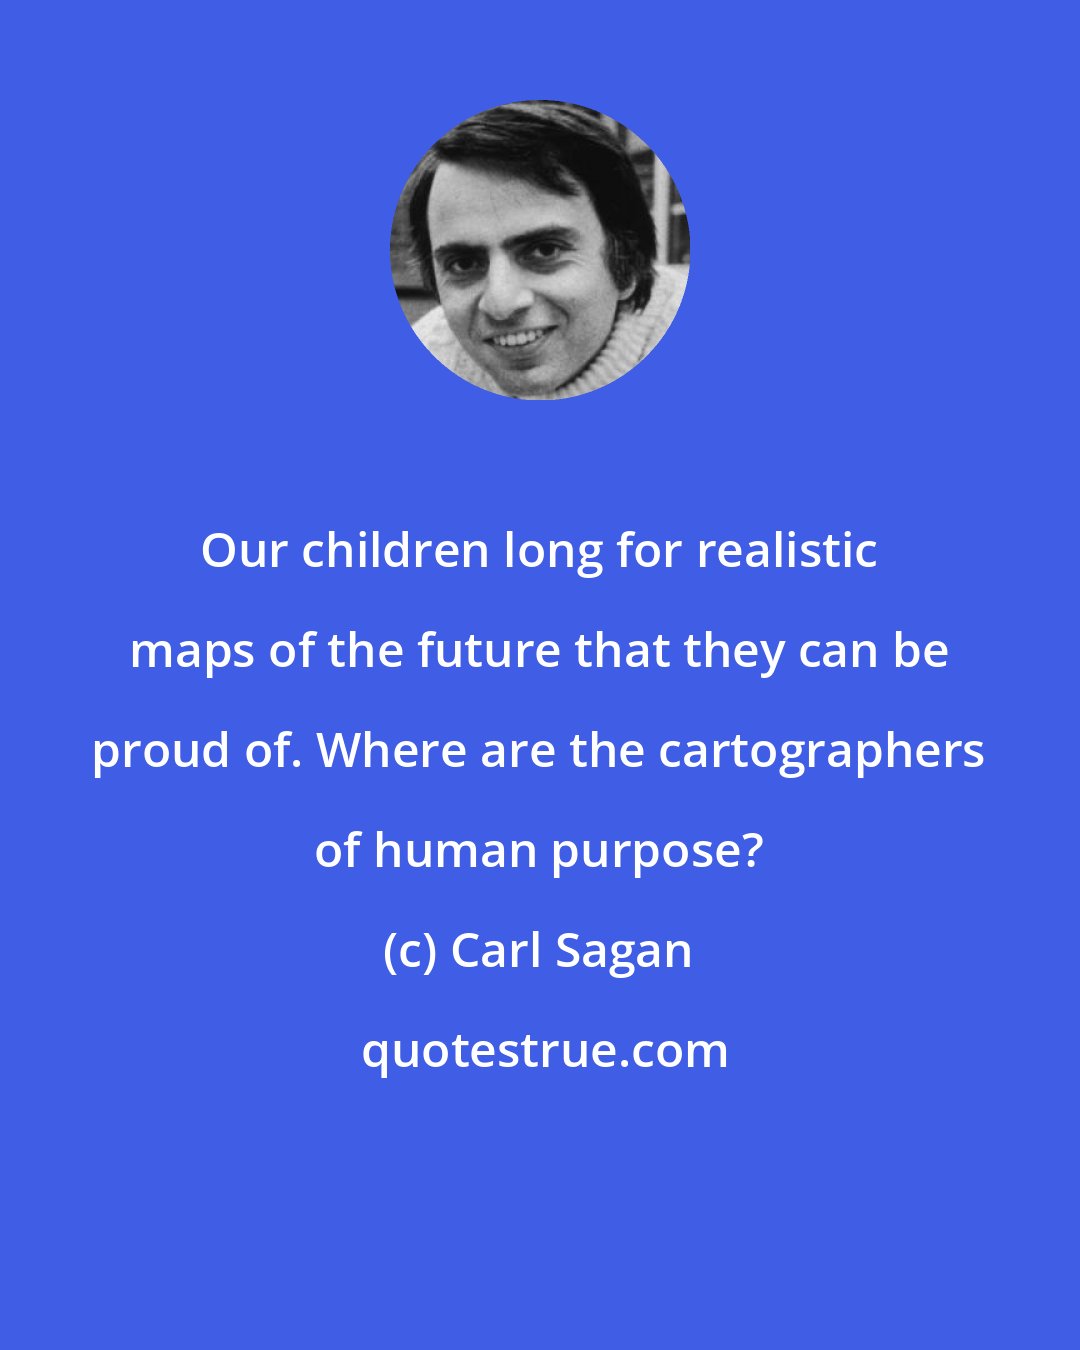 Carl Sagan: Our children long for realistic maps of the future that they can be proud of. Where are the cartographers of human purpose?